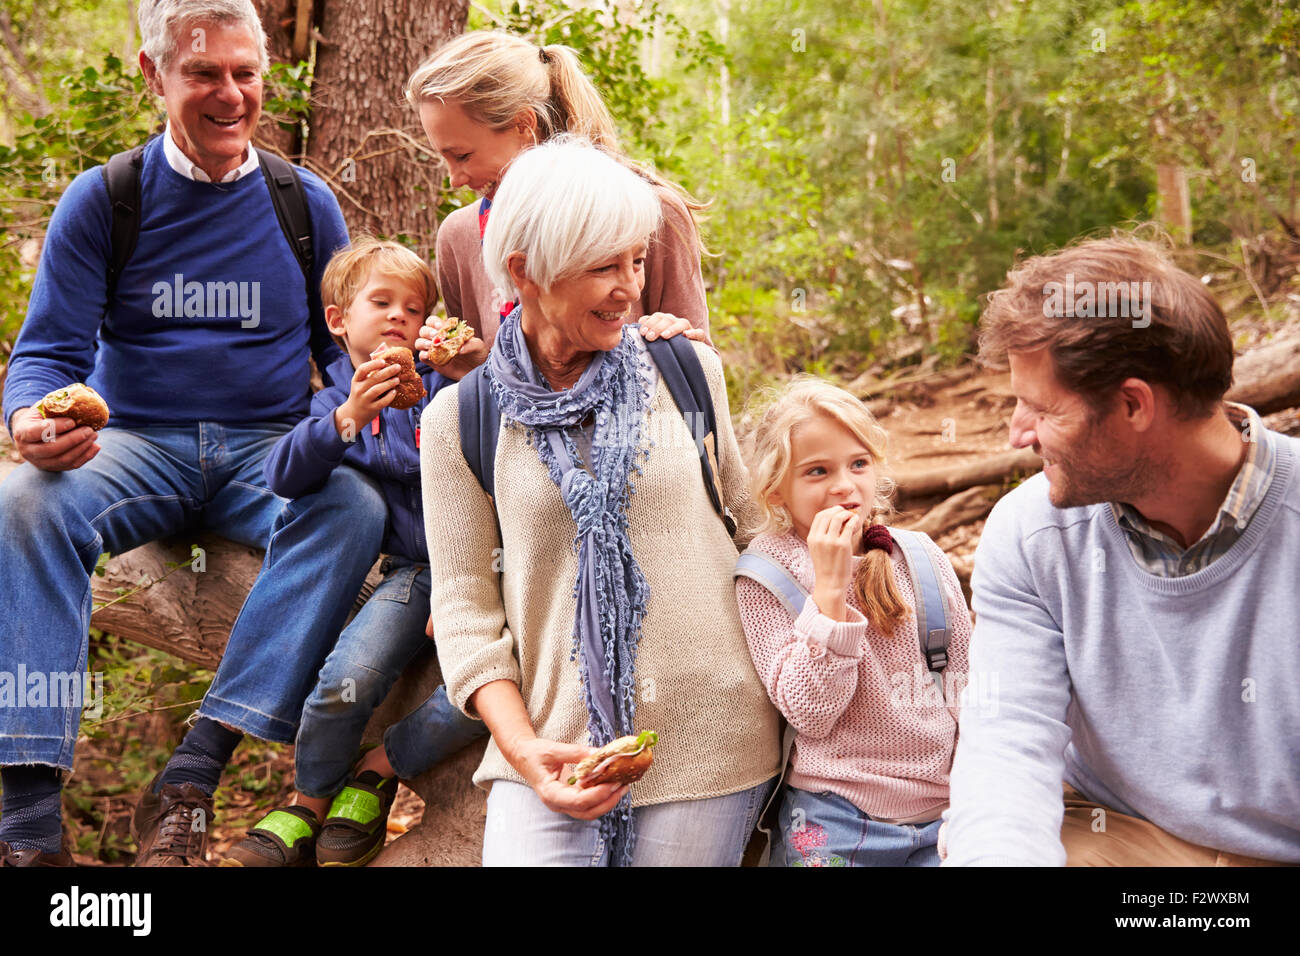 Multi-generation family eating together in a forest Stock Photo